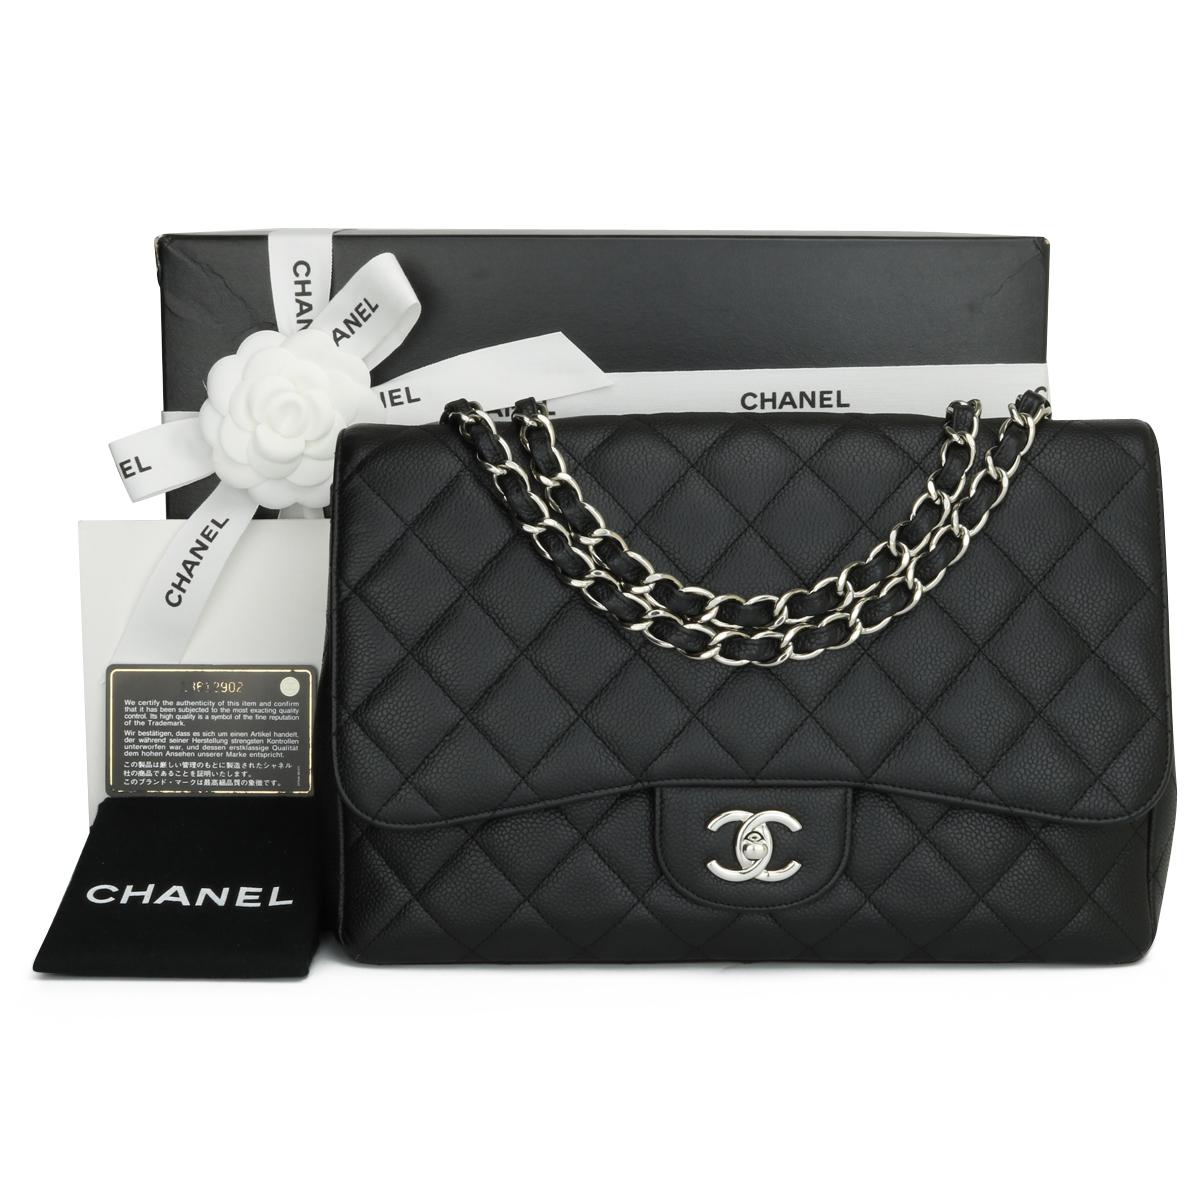 CHANEL Classic Single Flap Jumbo Bag Black Caviar with Silver Hardware 2010

This stunning bag is in very good condition, the bag still holds its shape well, and the hardware is still very shiny.

- Exterior Condition: Very good condition. Corners